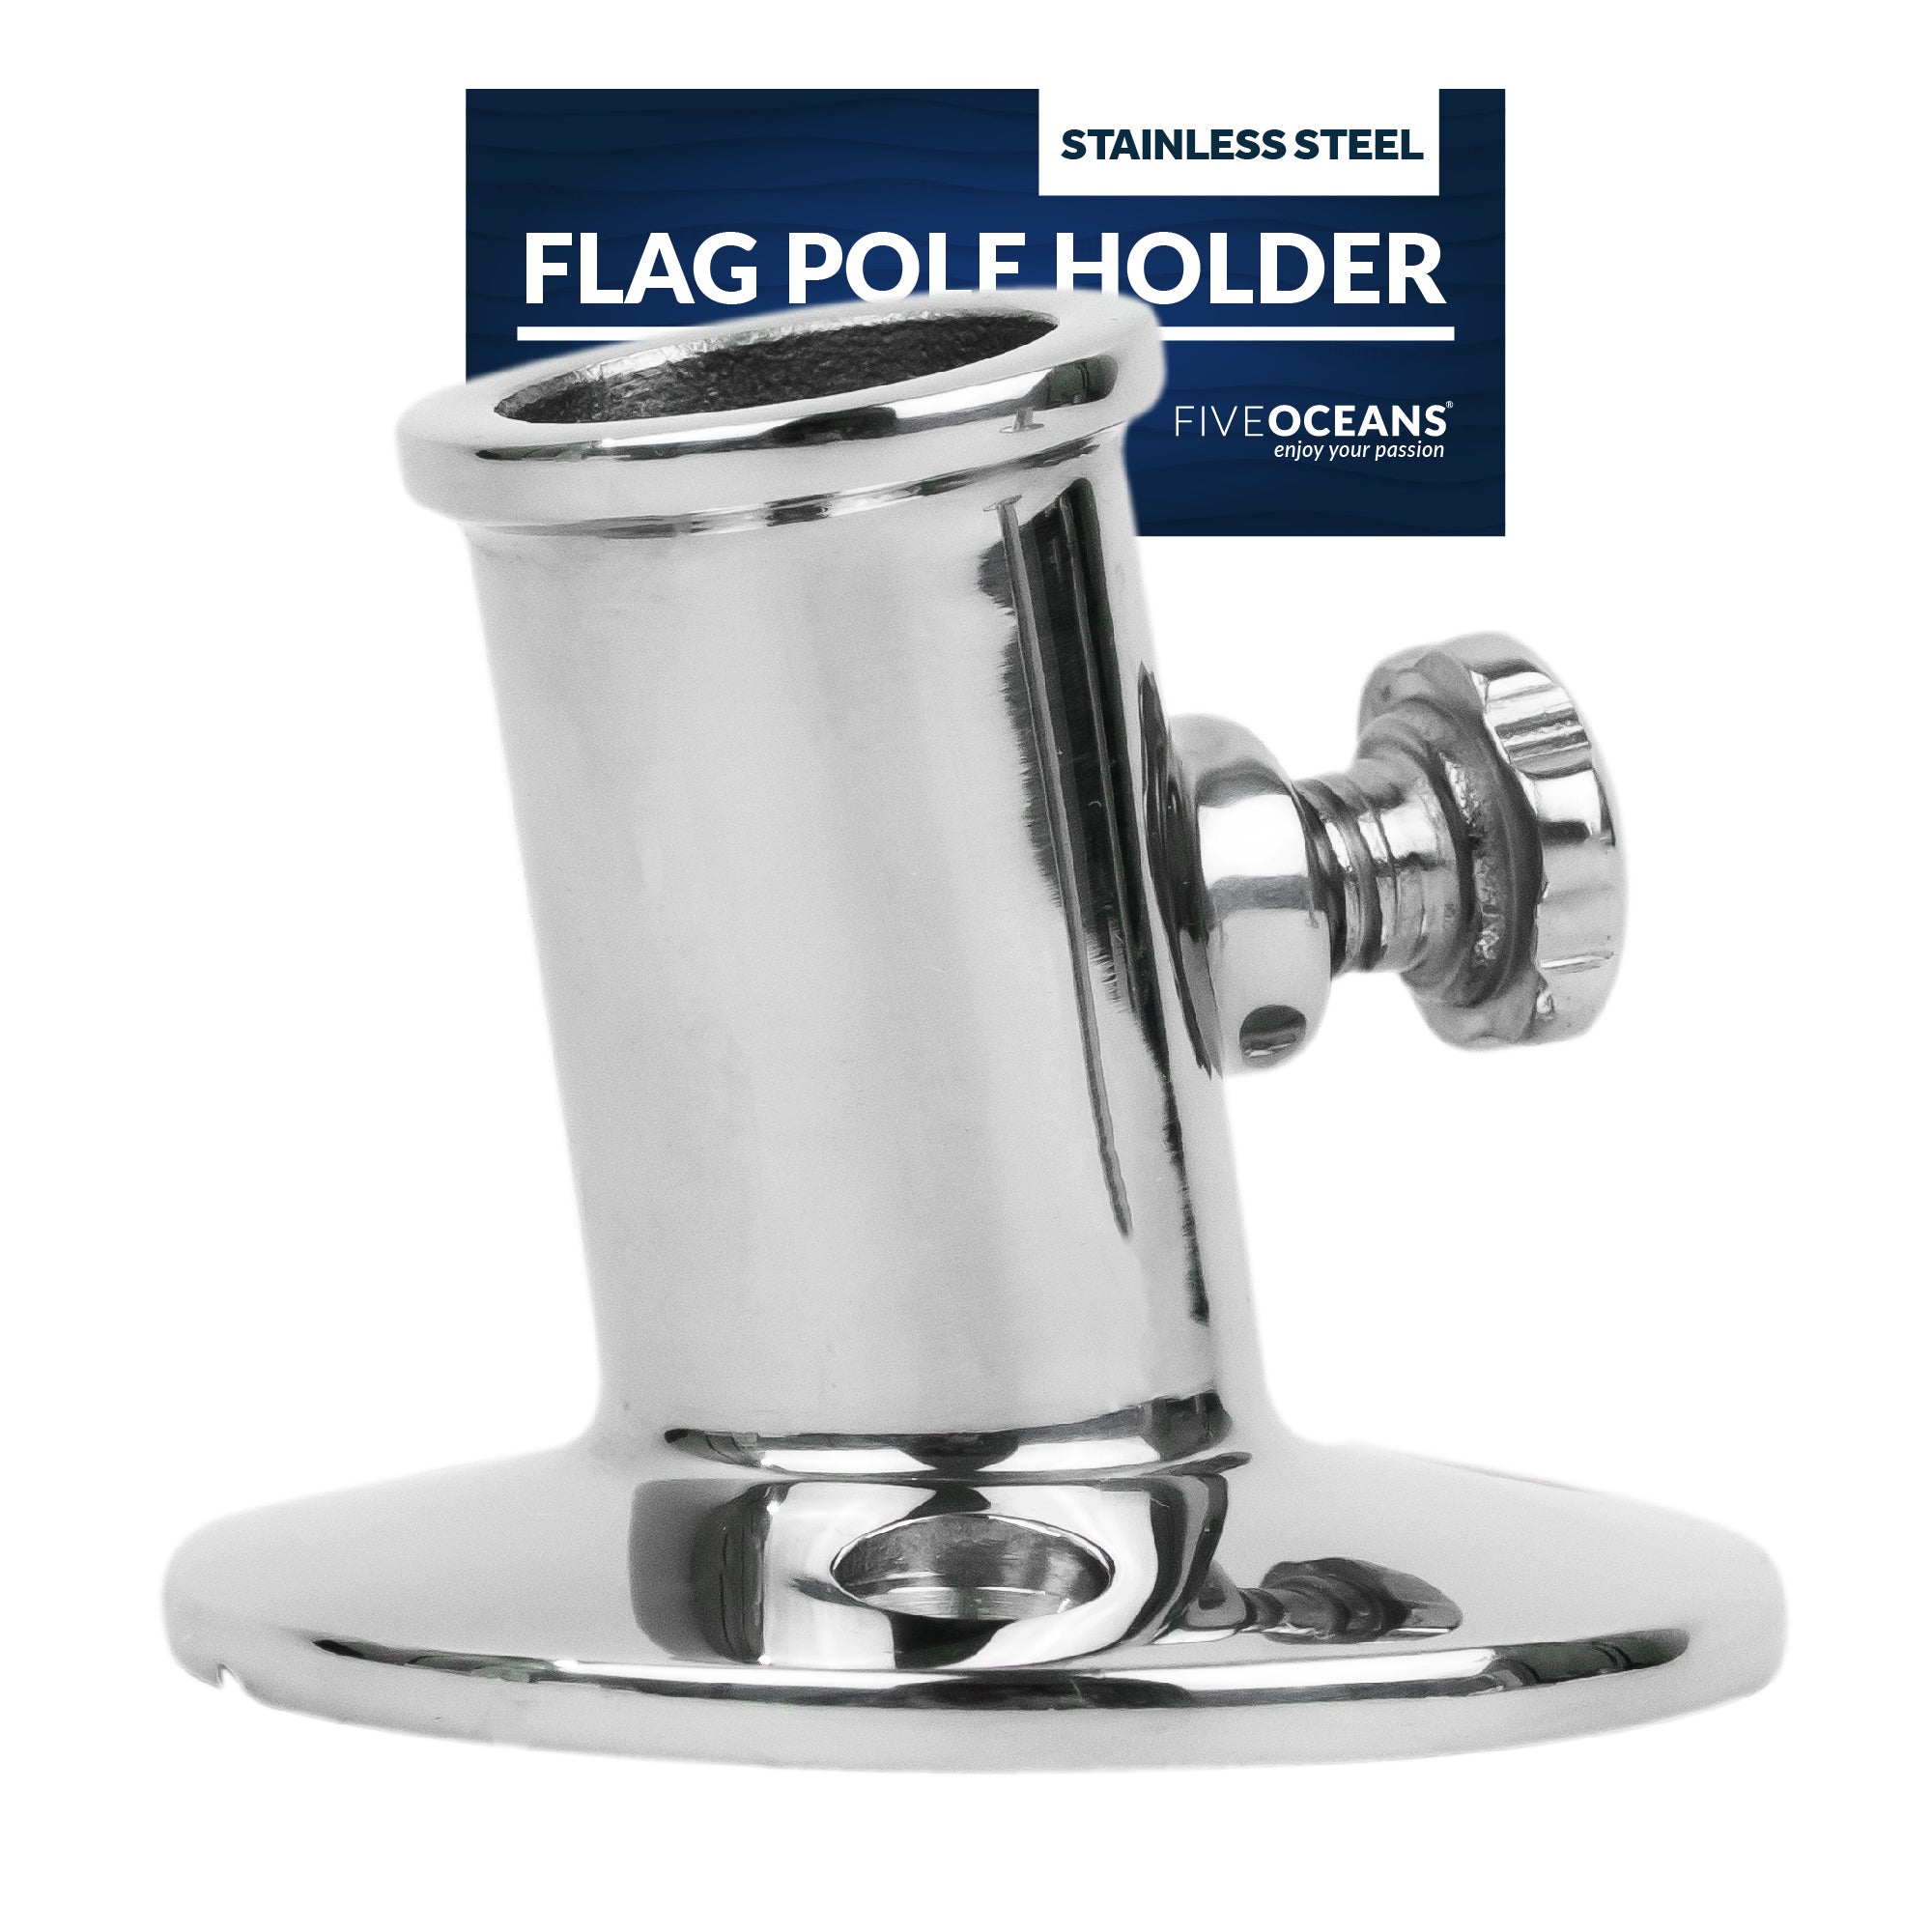 Flag Pole Socket with Knob, Stainless Steel - FO3109